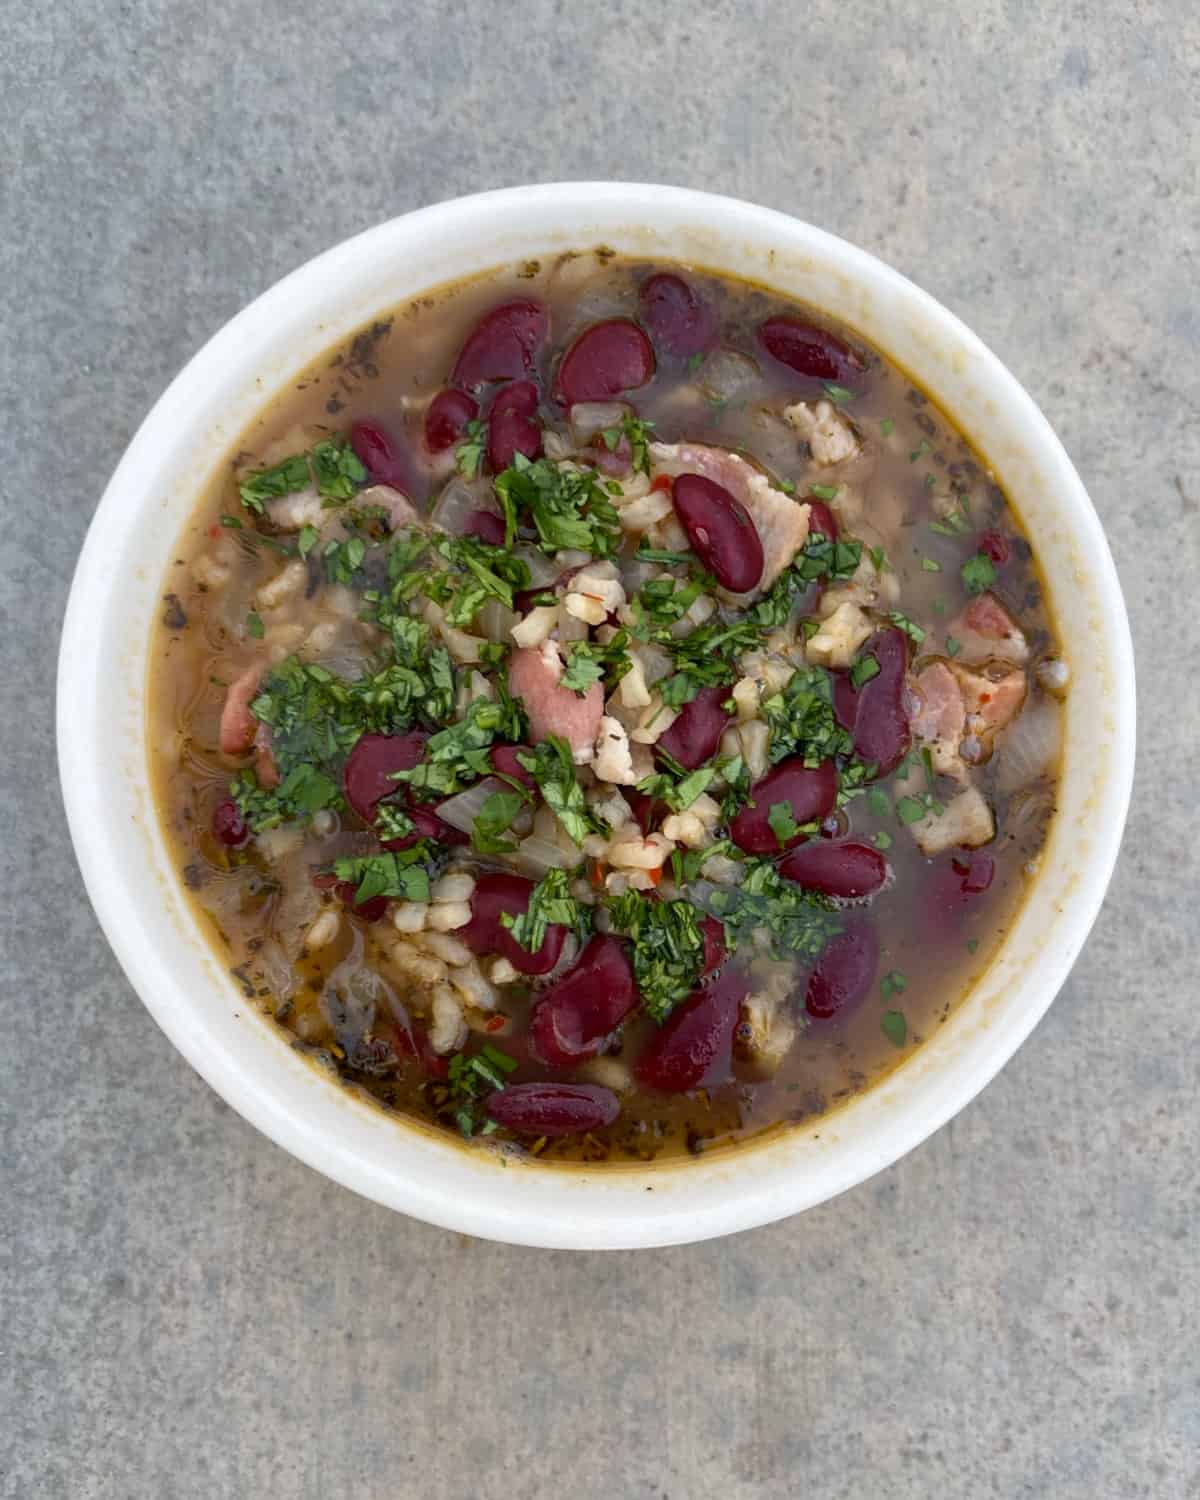 Jamaican Jerk A spiced red bean and rice soup garnished with chopped cilantro in a white bowl.